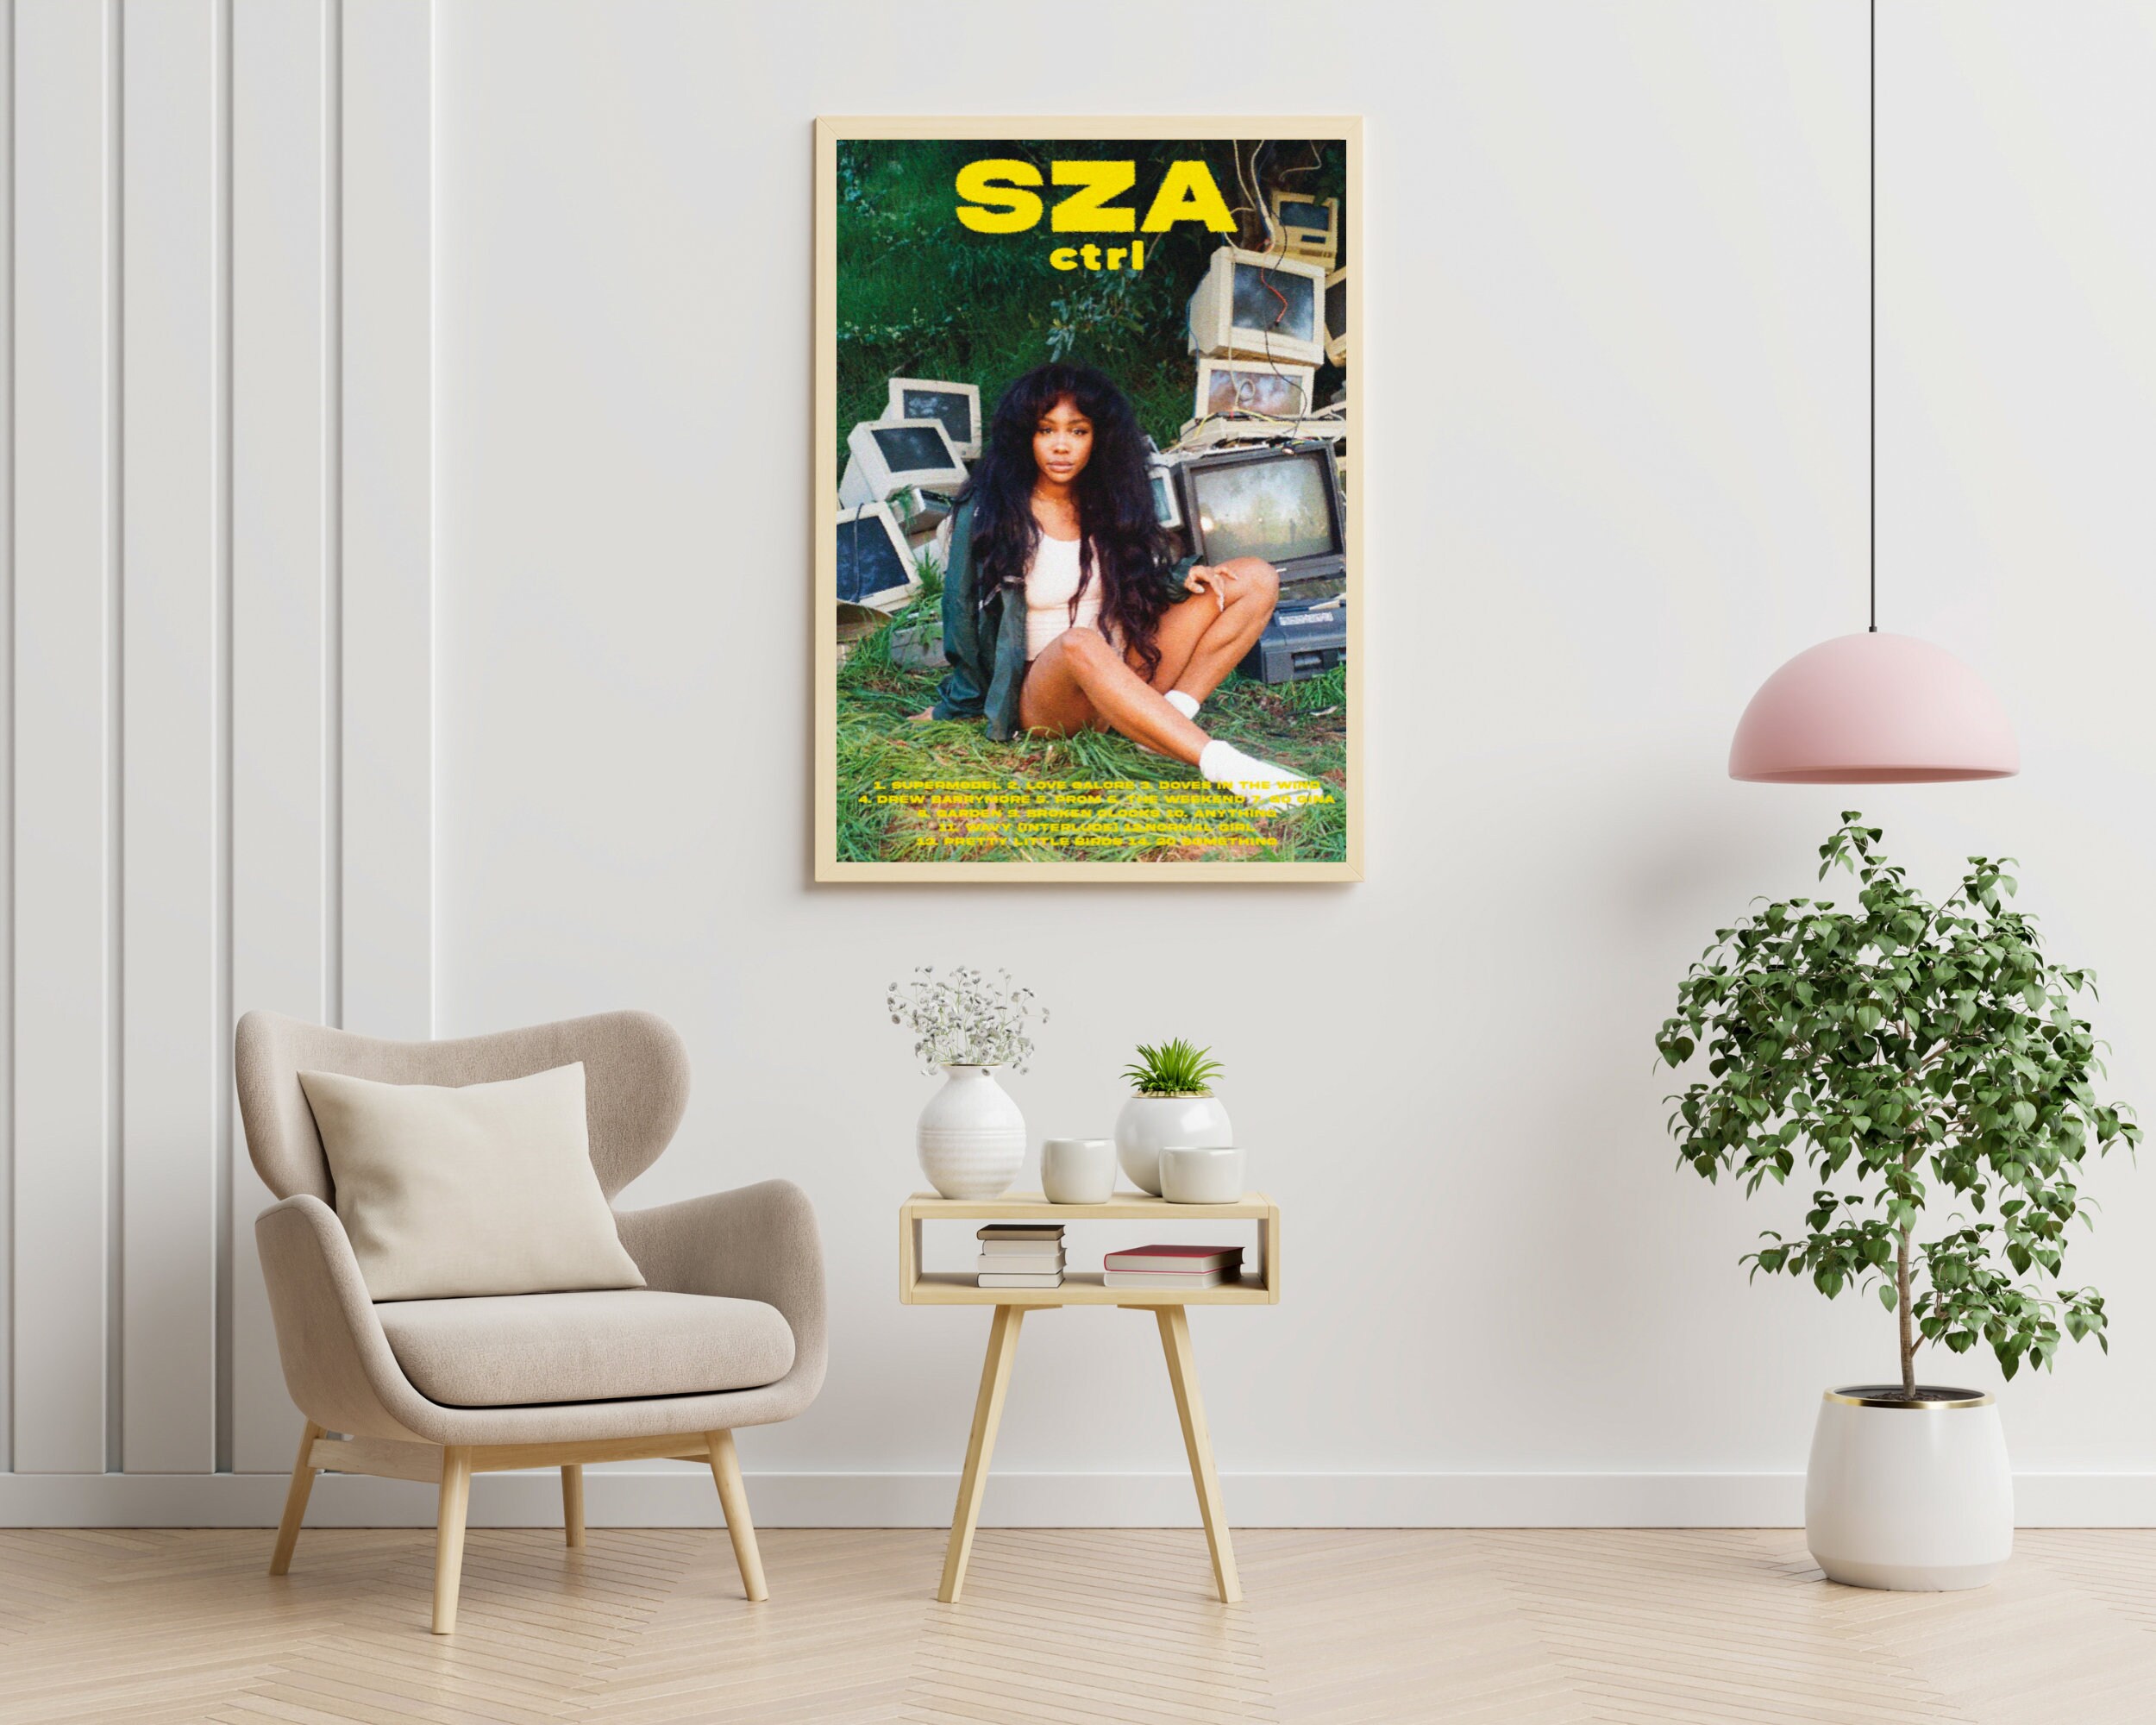  Sza Sos Album Cover Poster Wall Decor Canvas Art Wall Art  Poster Scroll Canvas Painting Picture Living Room Decor Home  Framed/Unframed 12x18inch(30x45cm): Posters & Prints